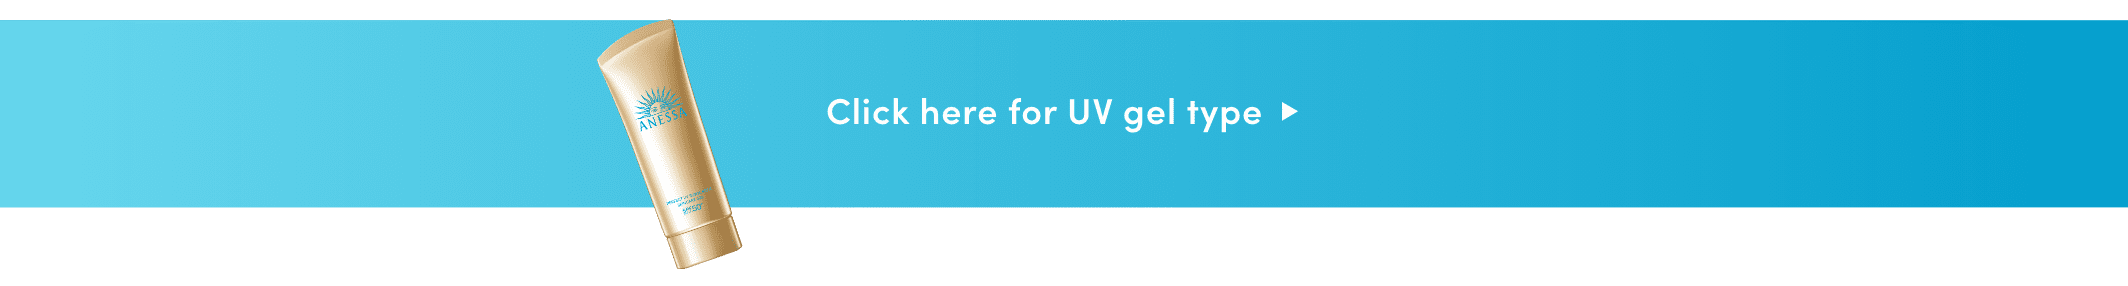 Click here for UV gel type